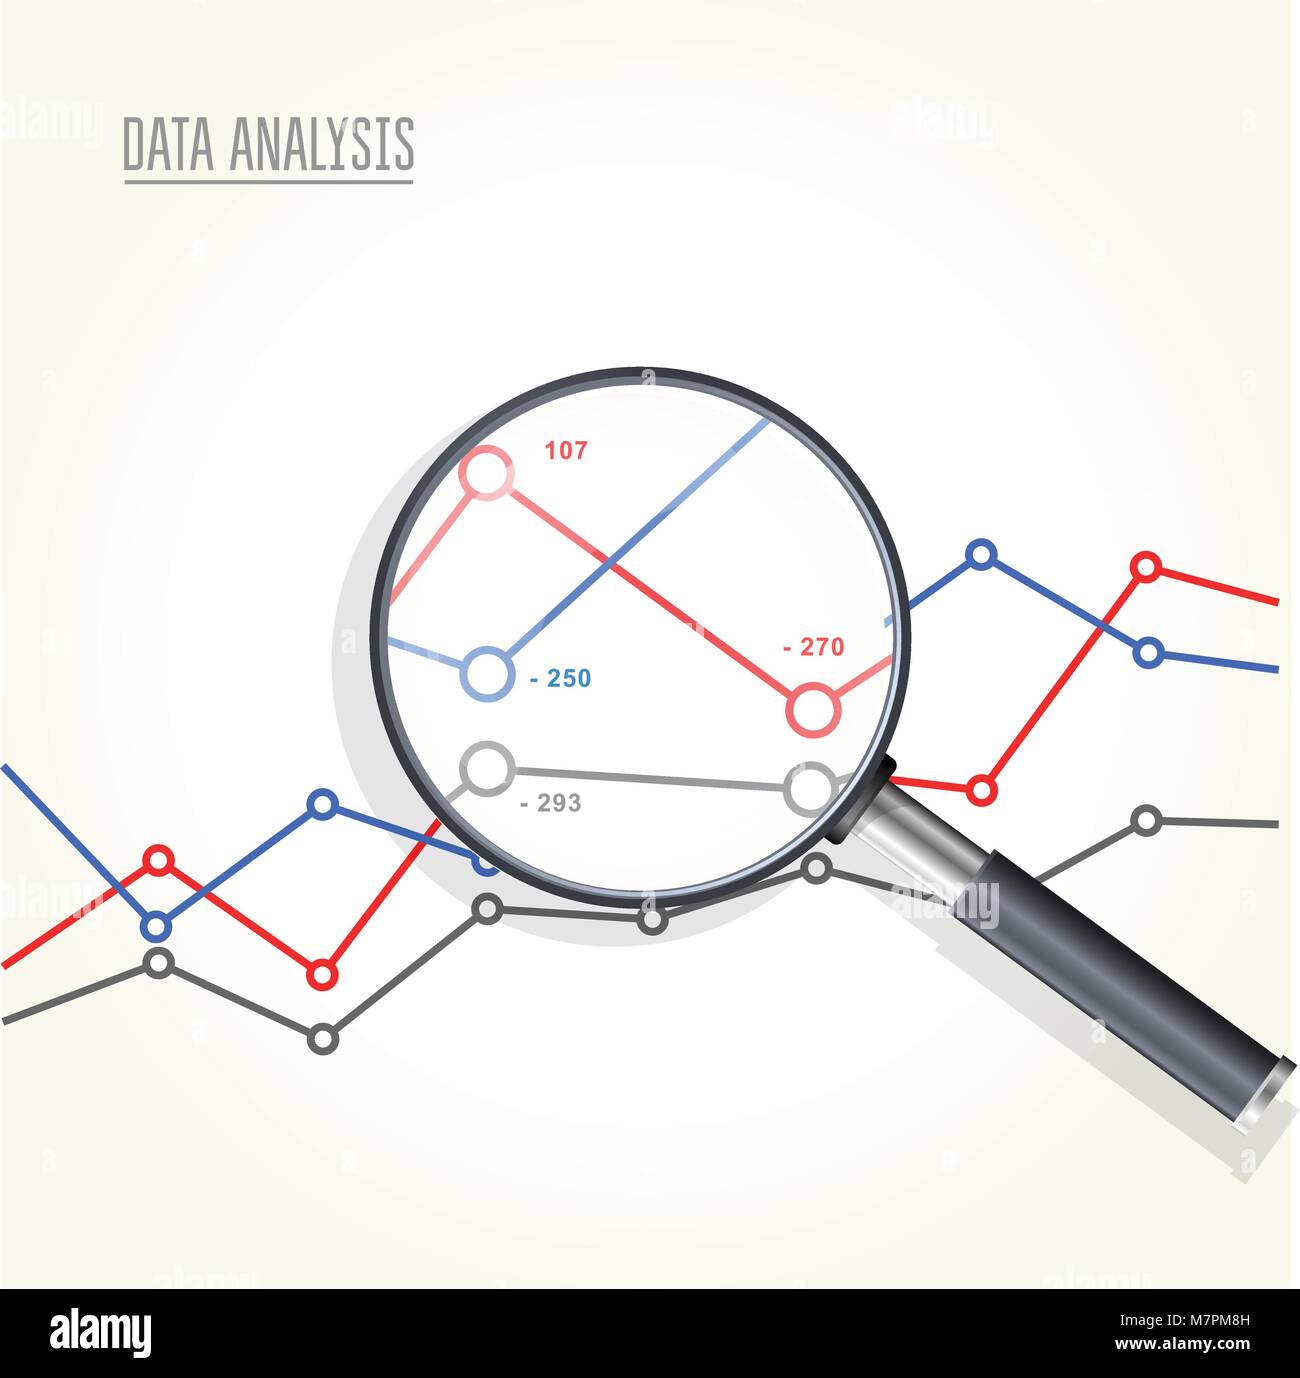 Magnifying glass over charts - data statisics research, stock market analytics Stock Vector